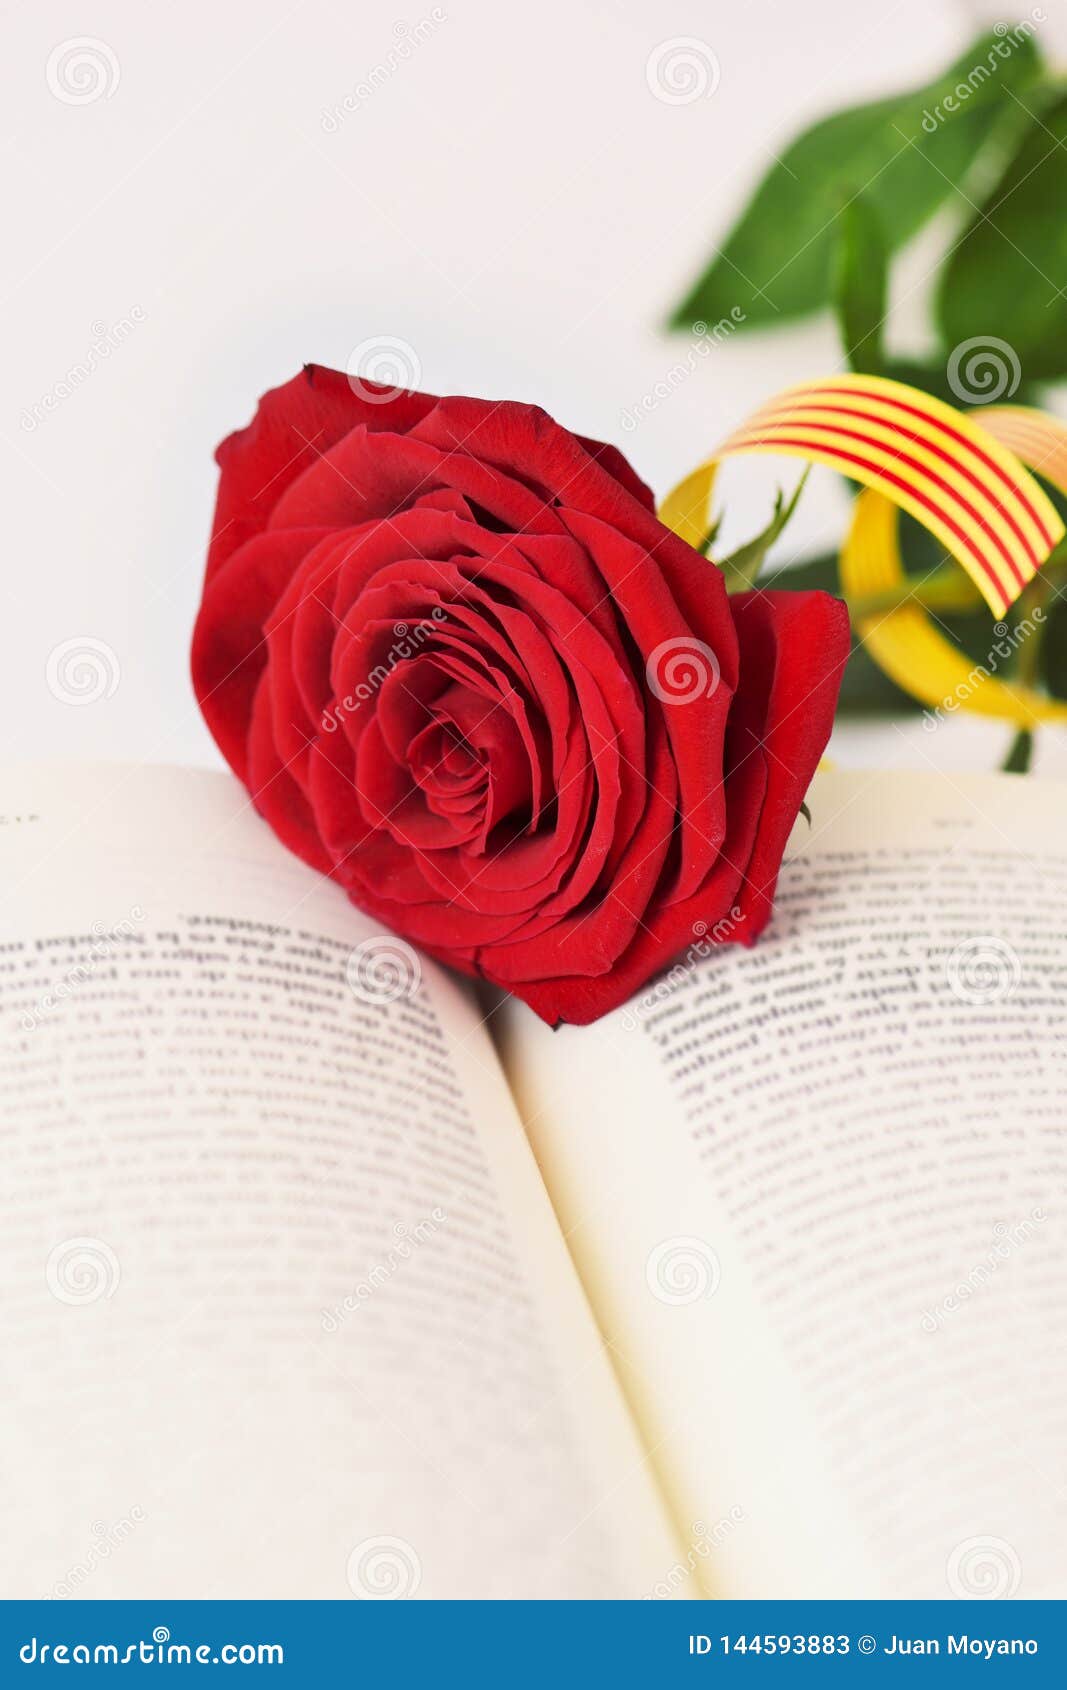 book, red rose and catalan flag